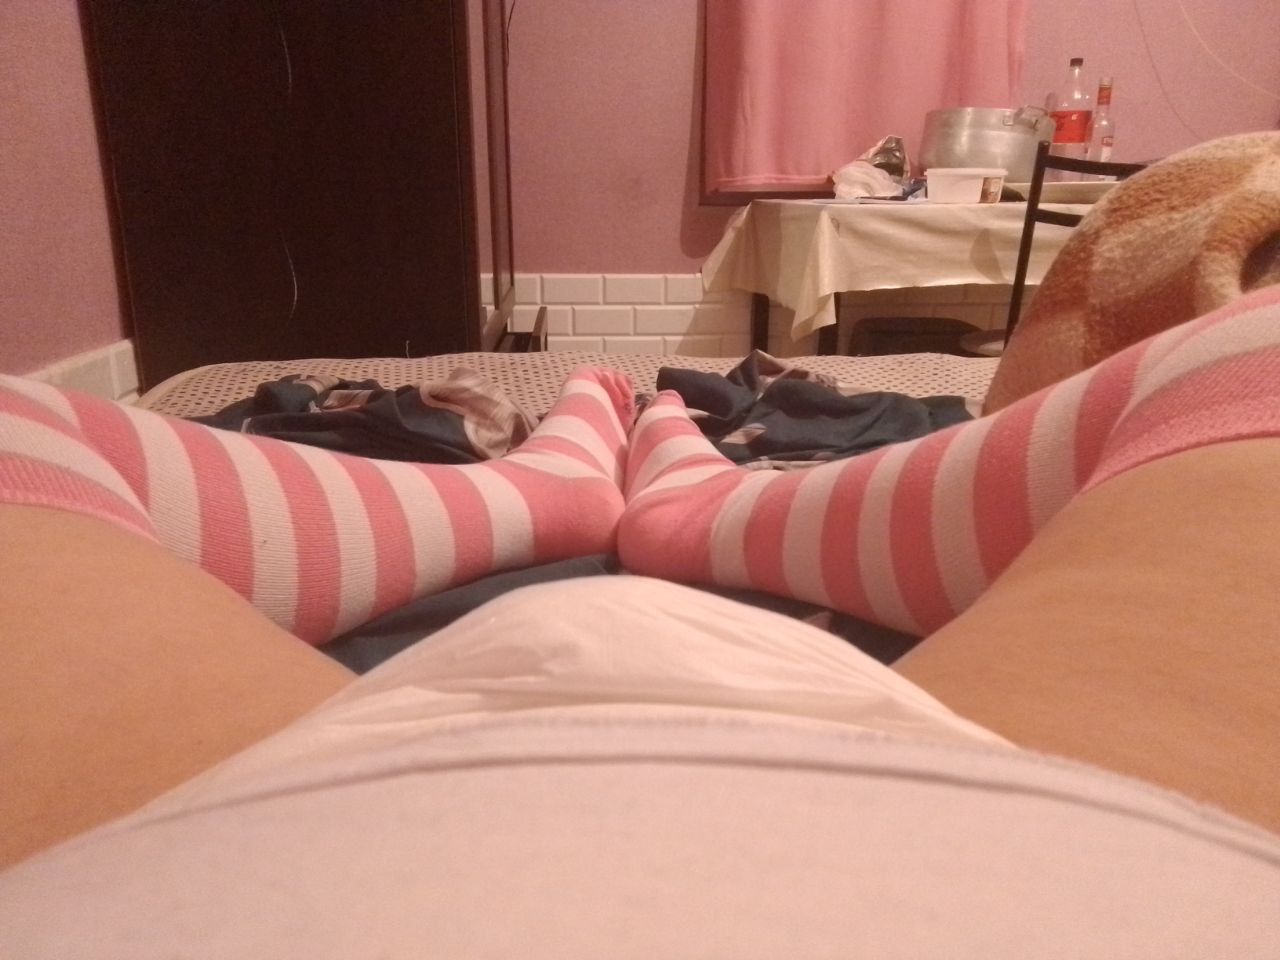 Me Diapered with striped bubblegum stockings